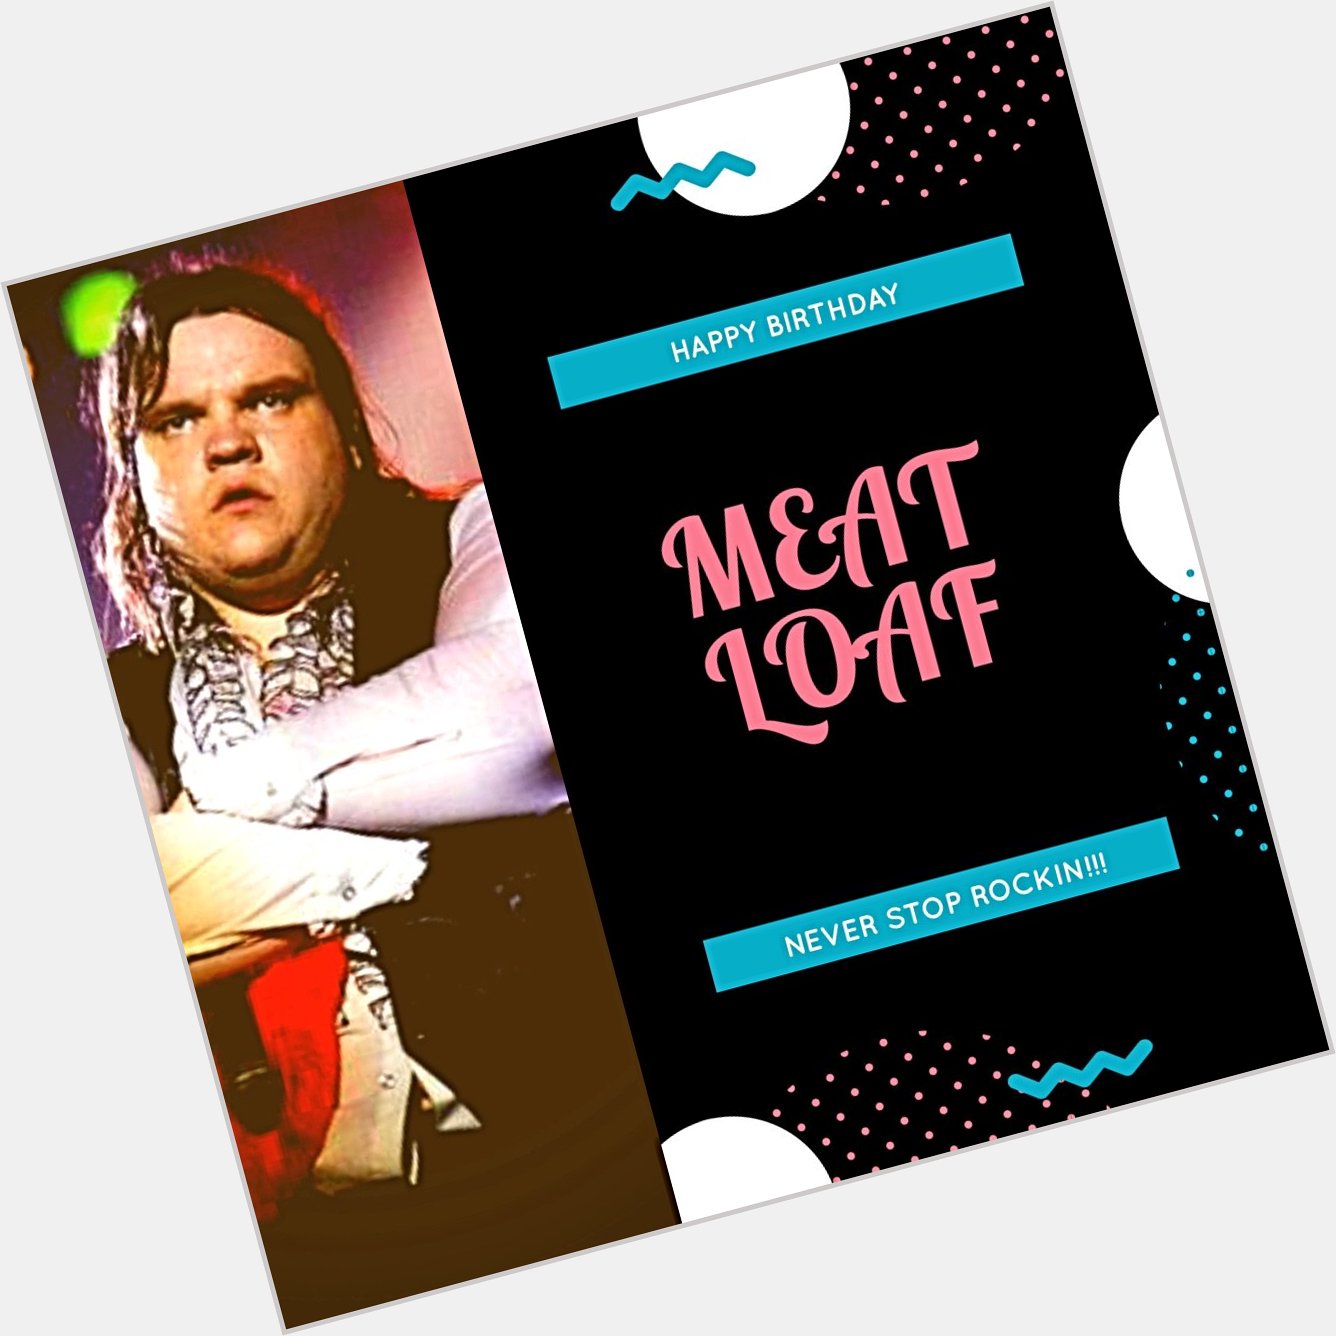 HAPPY BIRTHDAY MEAT LOAF!!!
Never Stop Rocking!!! 